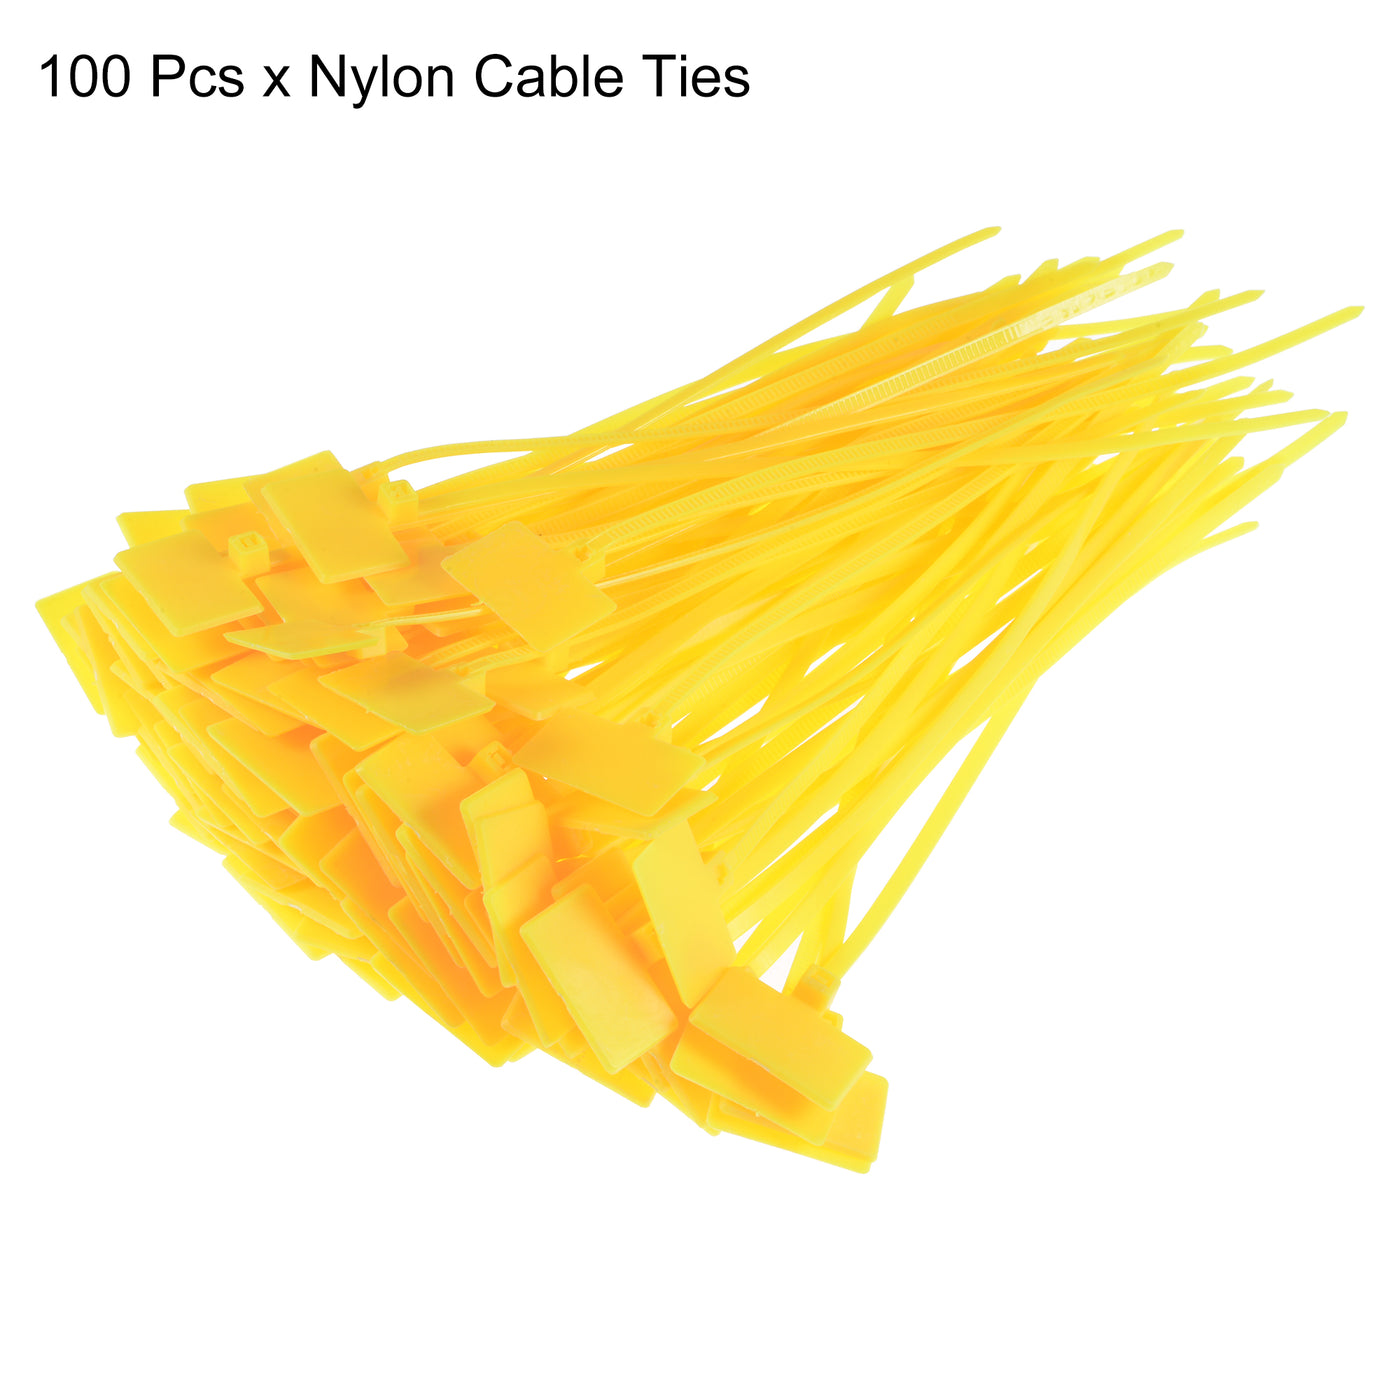 uxcell Uxcell 100pcs Nylon Cable Ties Tags Label Marker Self-Locking for Marking Organizing Yellow